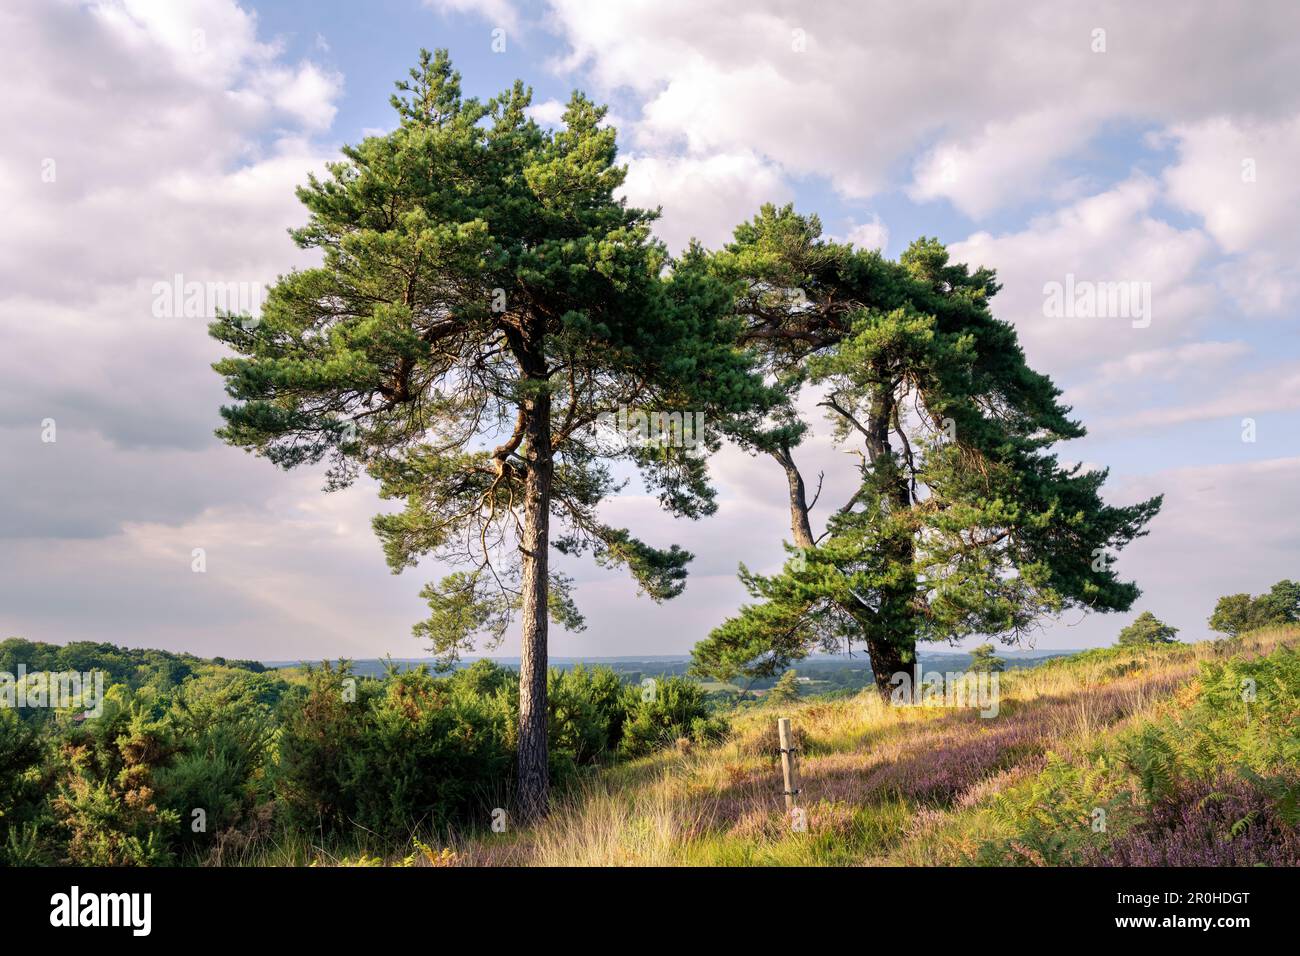 Two Pinus sylvestris or Scots pine trees in Ashdown forest on a cloudy summer afternoon, East Sussex, South East England Stock Photo